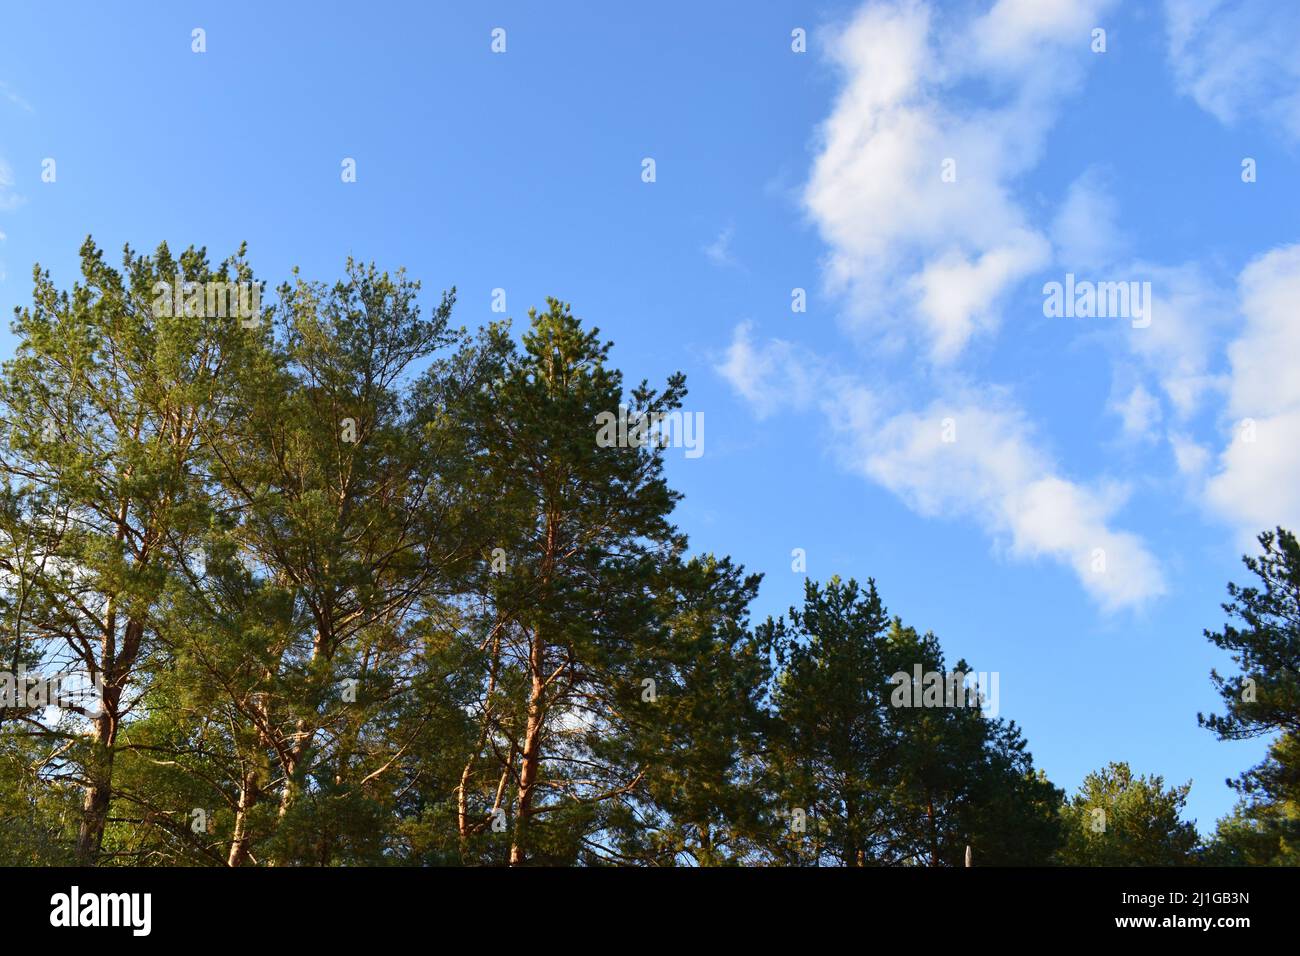 Fall leaves trees against blue sky. Autumn nature season landscape background. Copy space Stock Photo